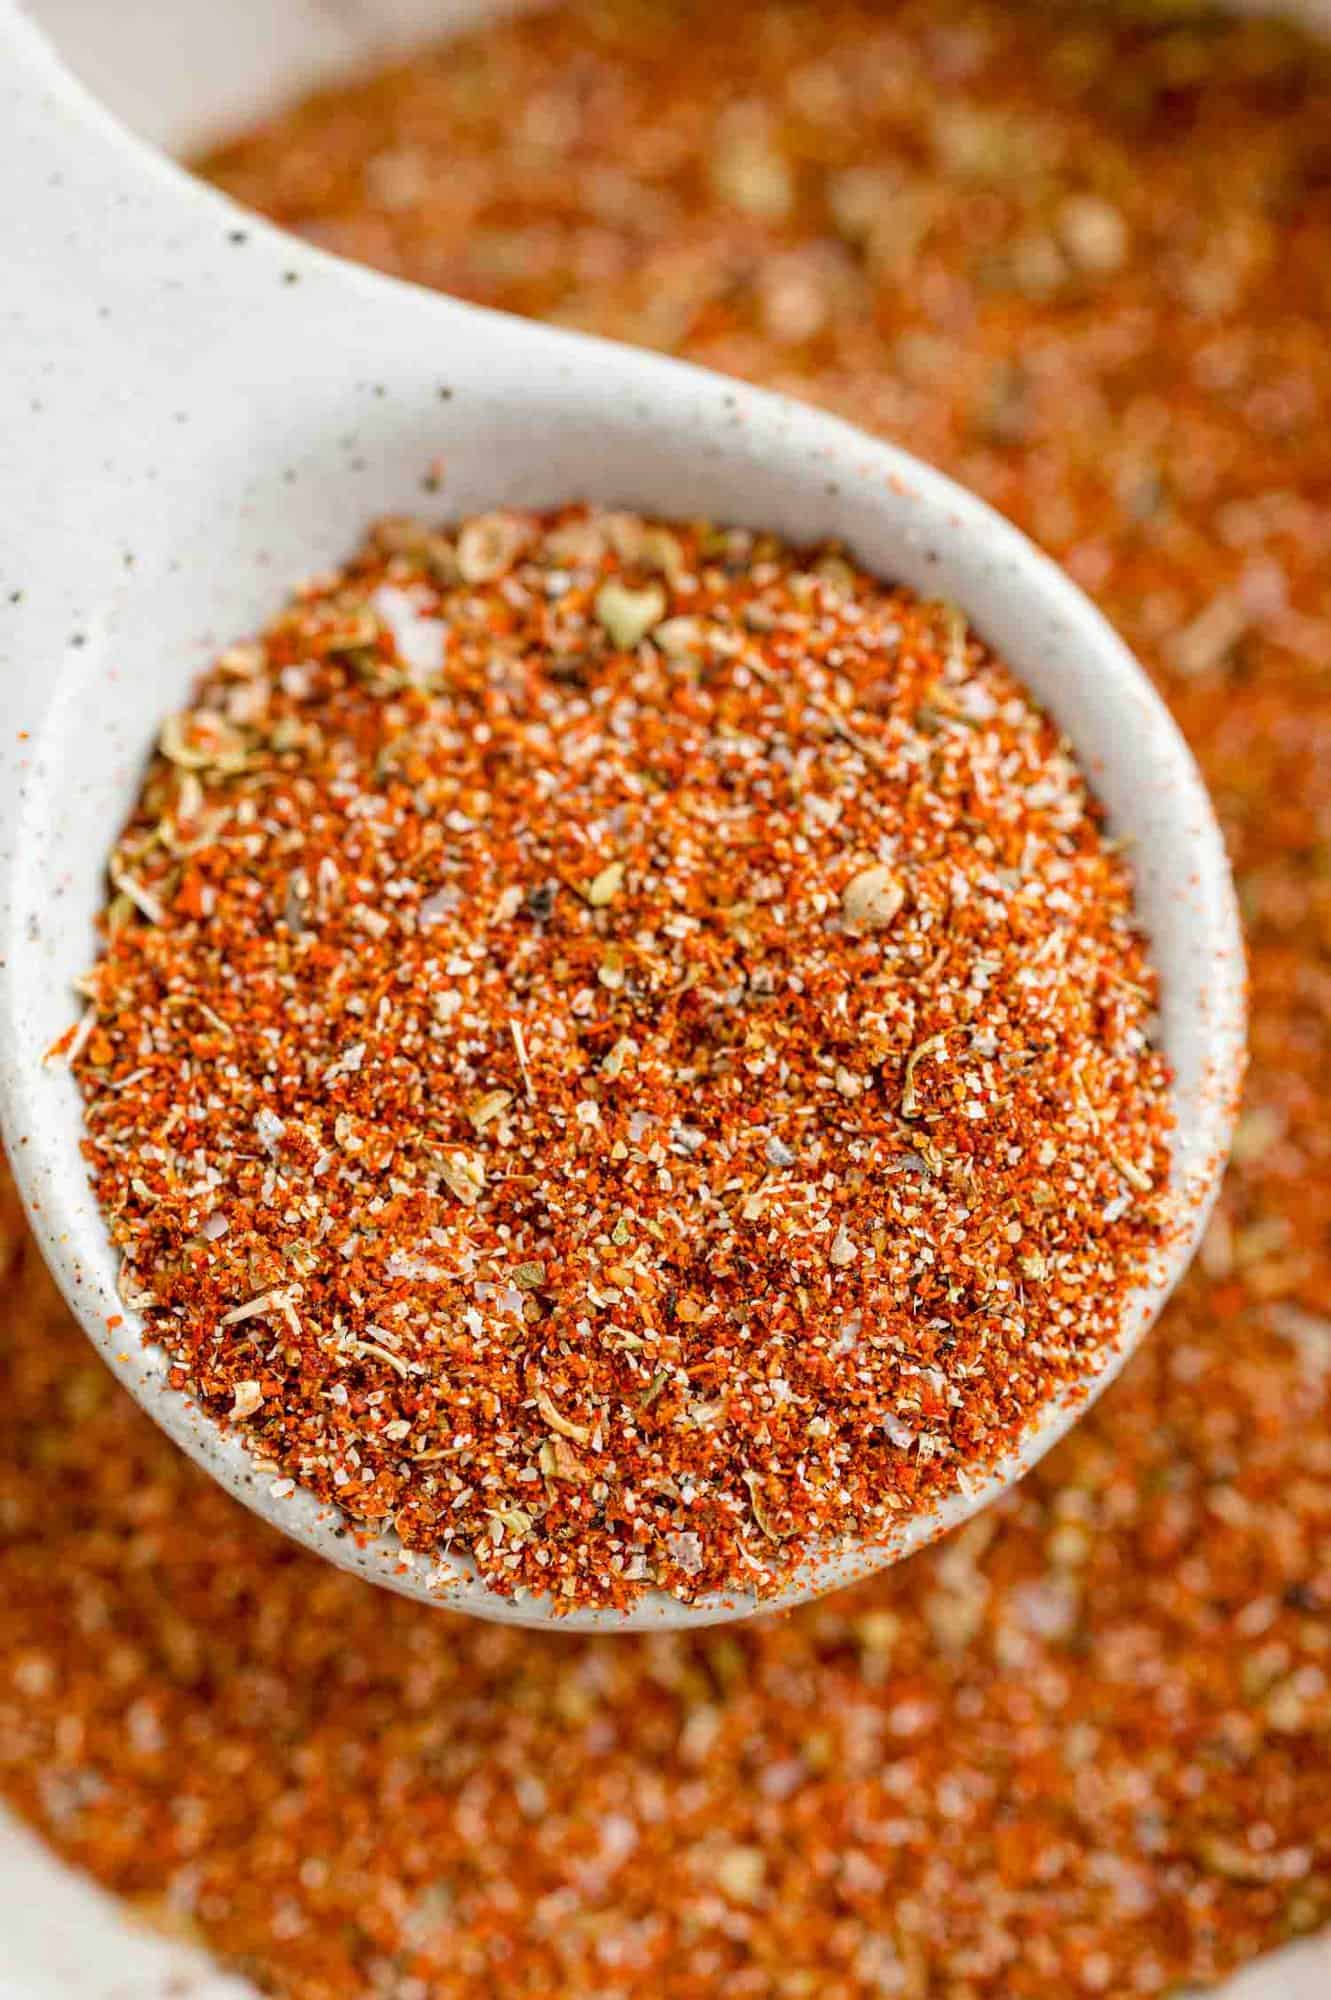 Close up of a spoonful of Southwest spice blend held over a bowl of seasoning.